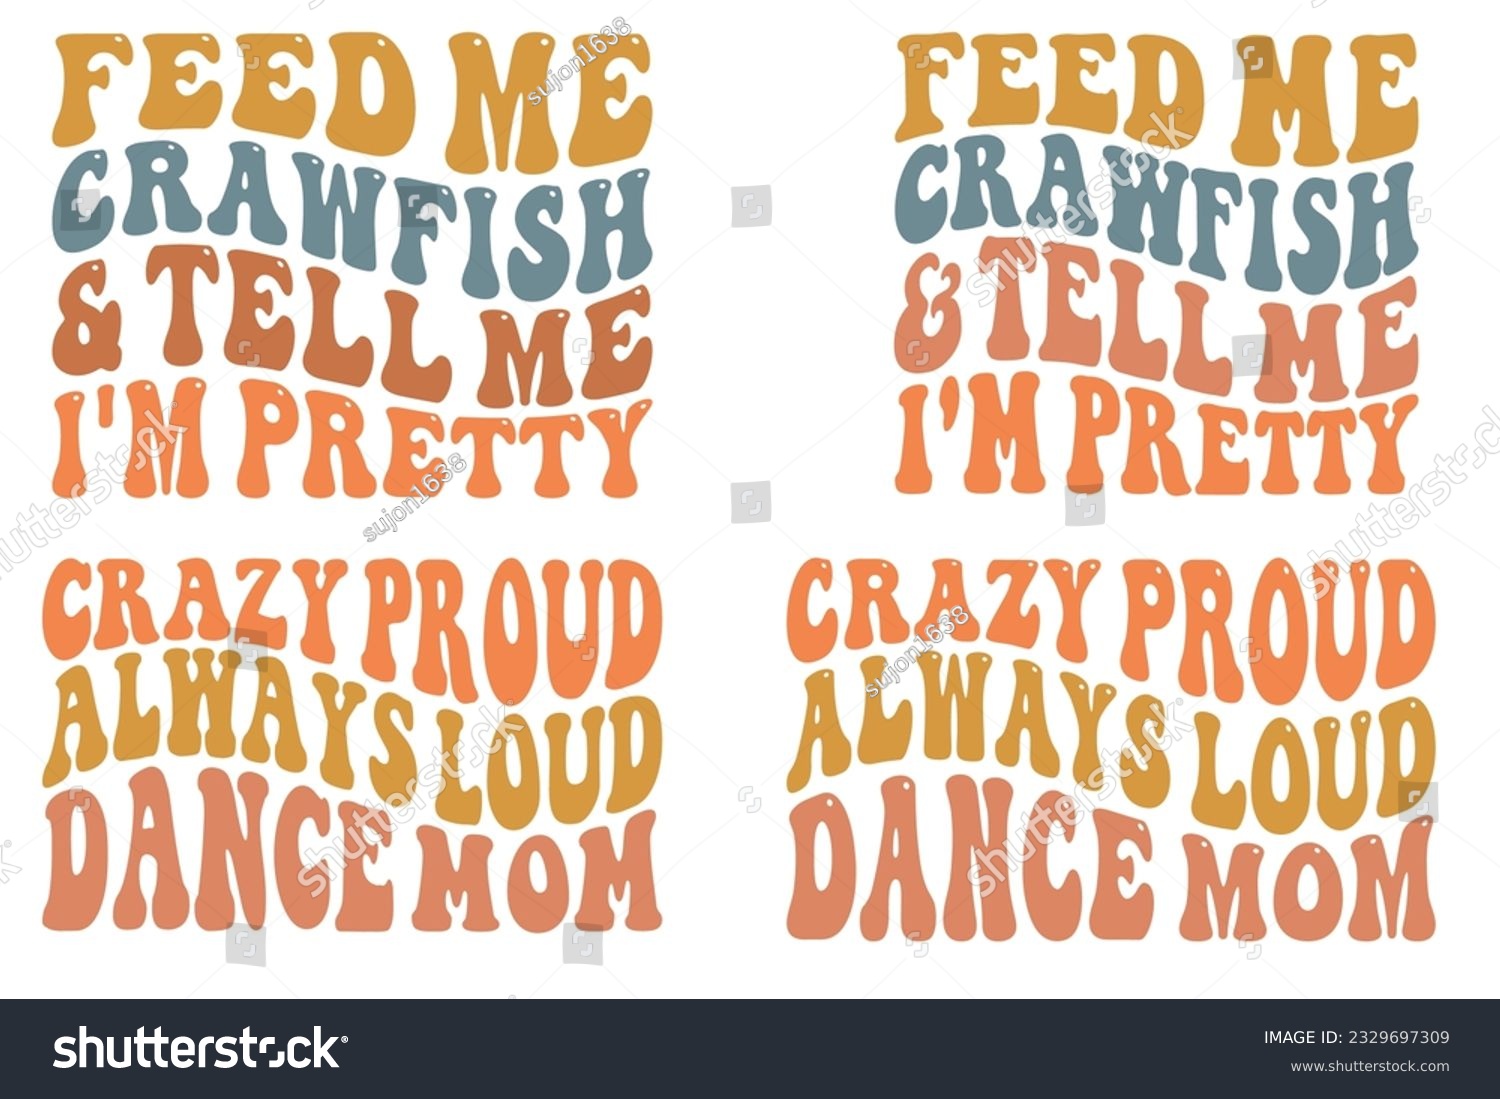 SVG of Feed Me Crawfish and Tell Me I'm Pretty, Crazy Proud Always Loud Dance Mom retro wavy SVG bundle T-shirt designs svg